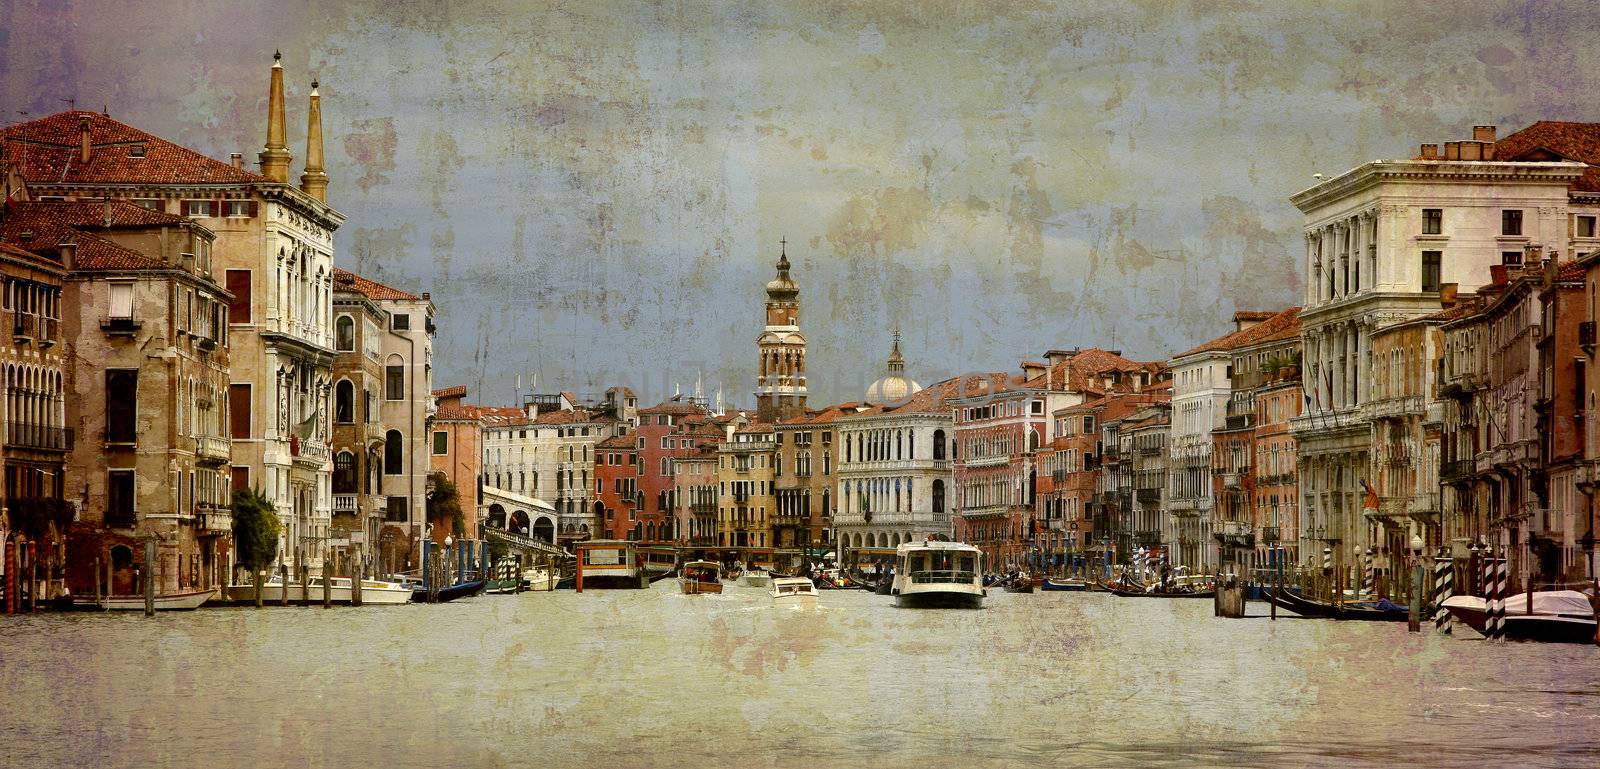 Artistic work of my own in retro style - Postcard from Italy. - Grand Canal  direction Rialto Bridge - Venice. Dramatic sky just before a storm.